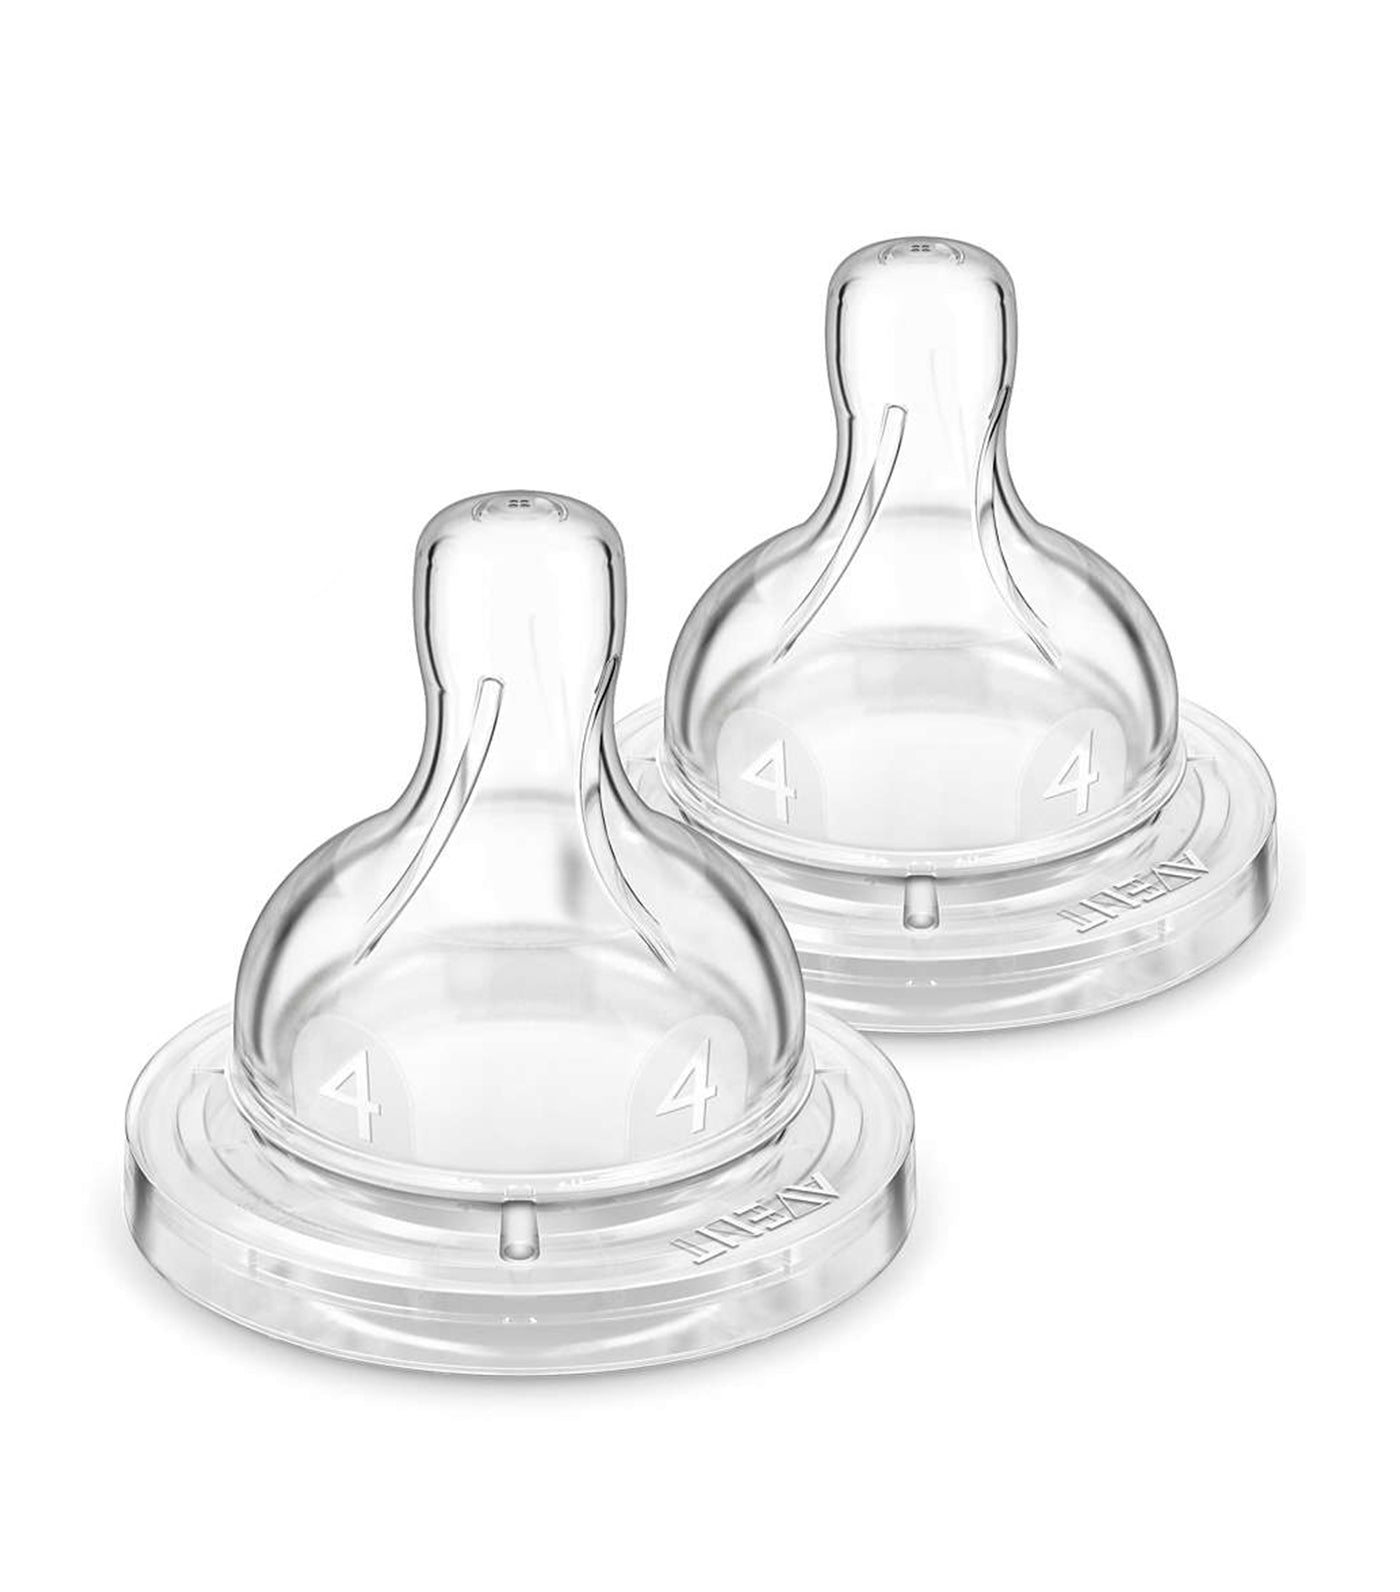 philips avent anti-colic fast flow teats (4 holes)